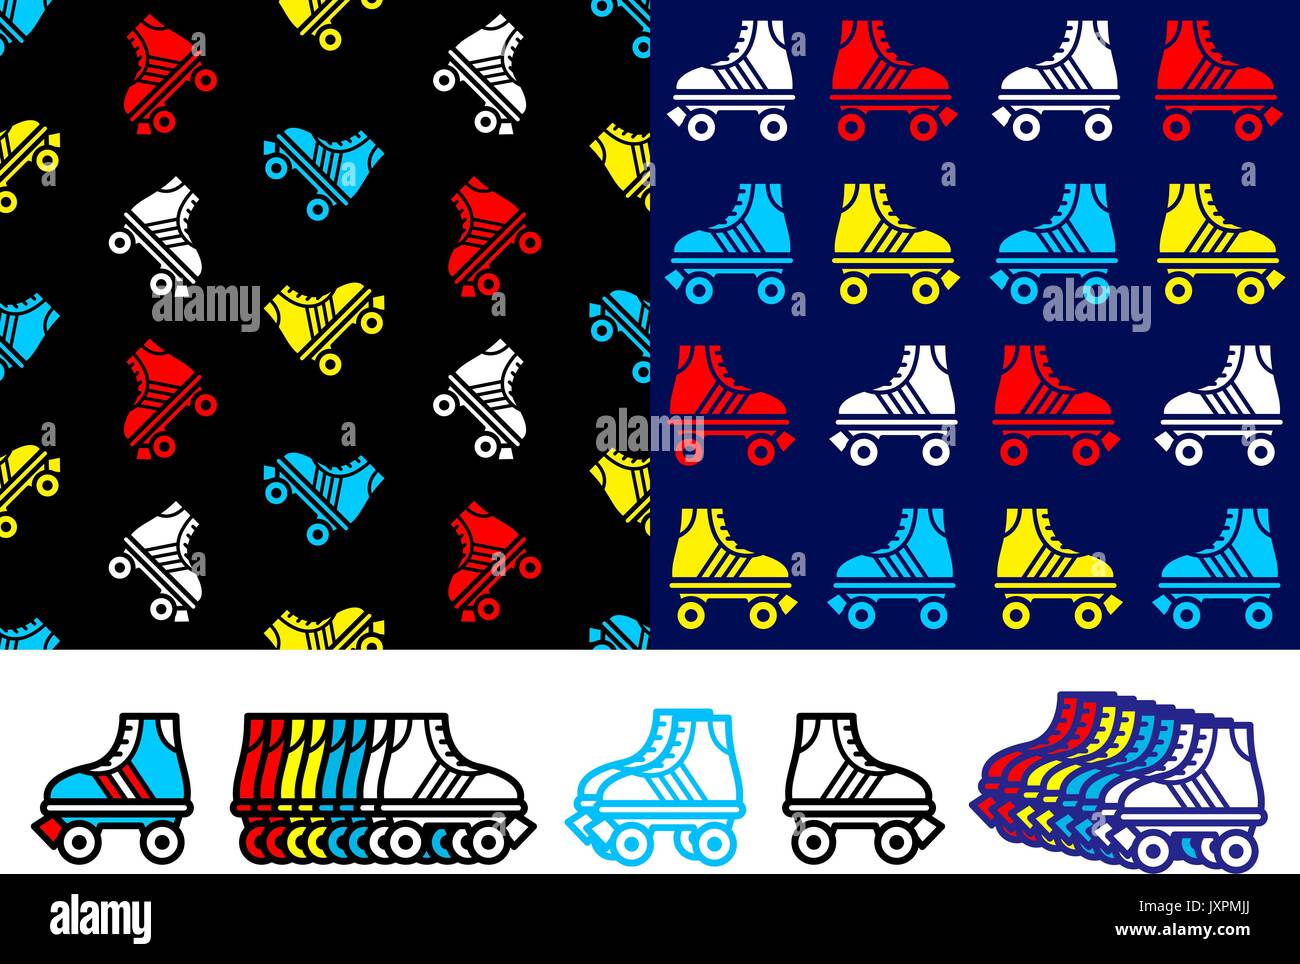 Roller skate seamless background pattern with colorful red, blue, yellow and white skate icons in two different pattern variations with a row of singl Stock Vector